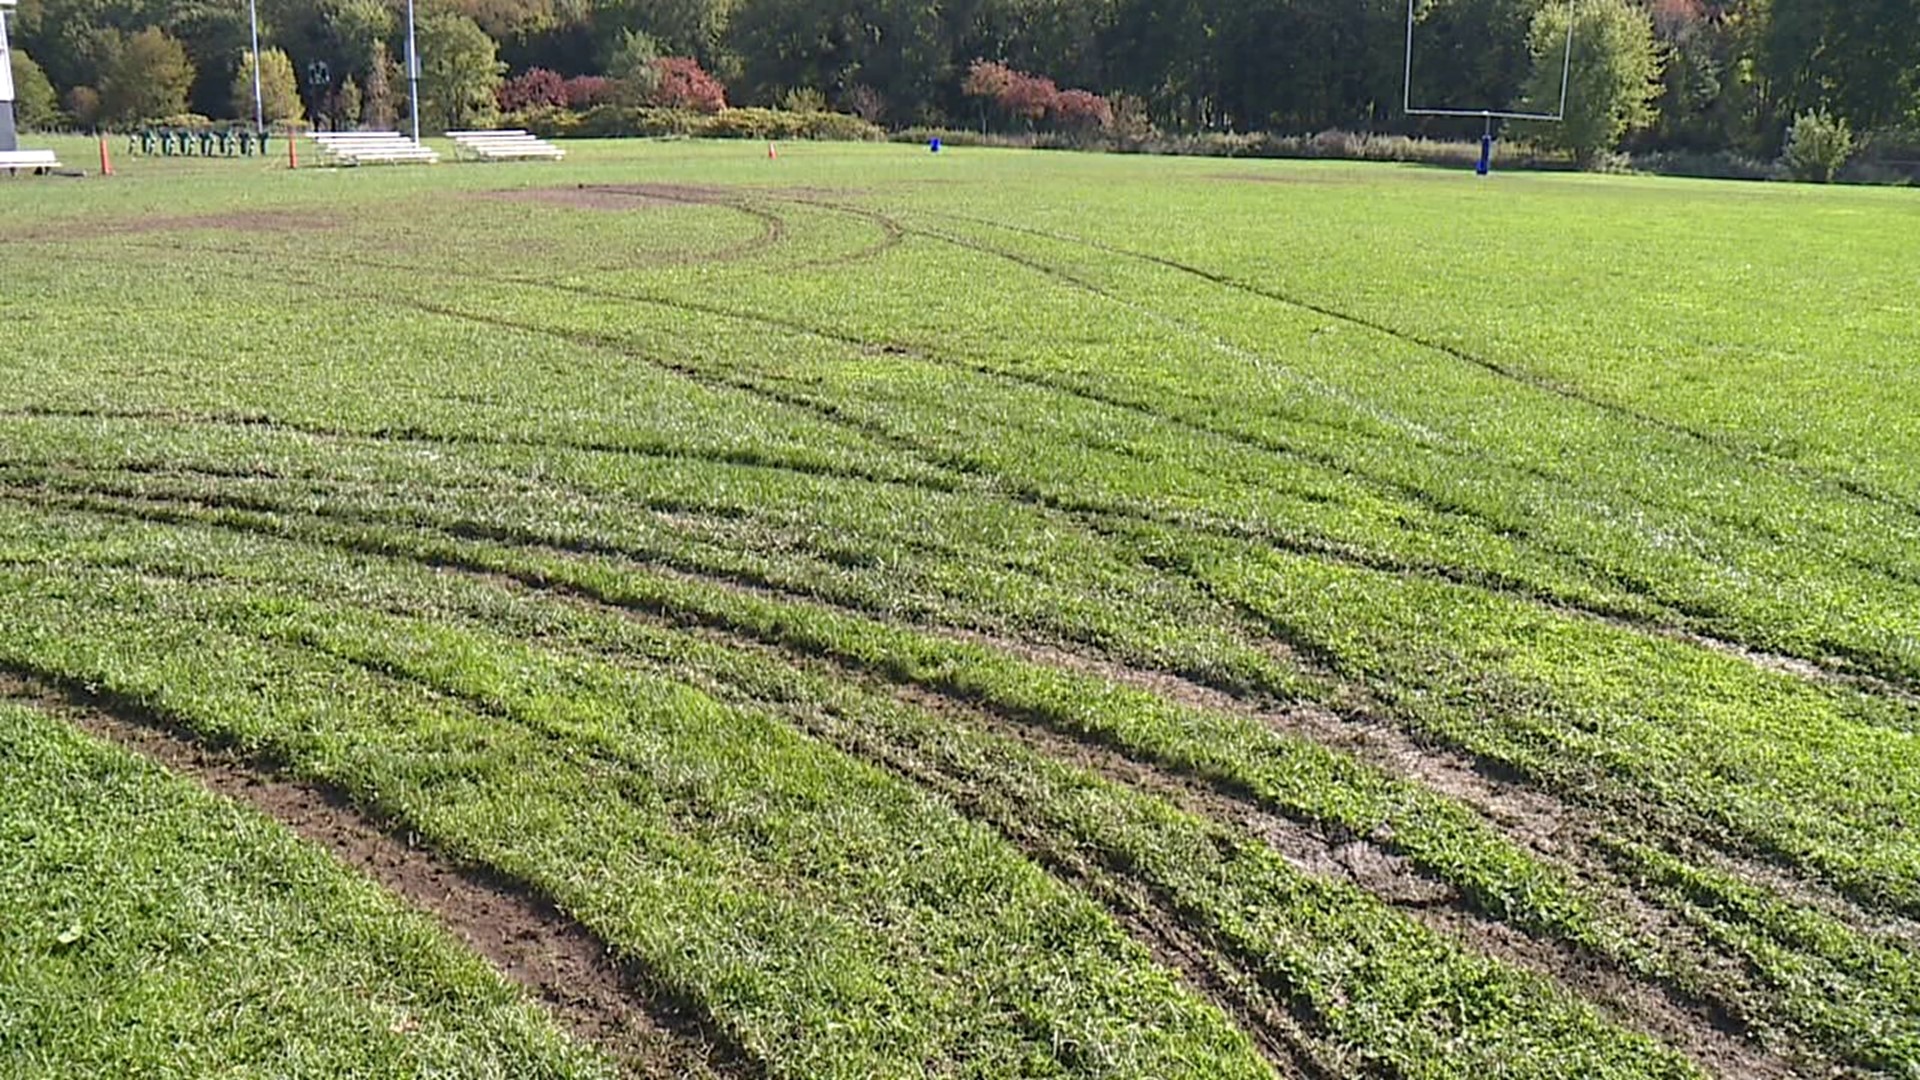 Scranton Police are investigating a vandalism at the West Side Falcons Football Field.